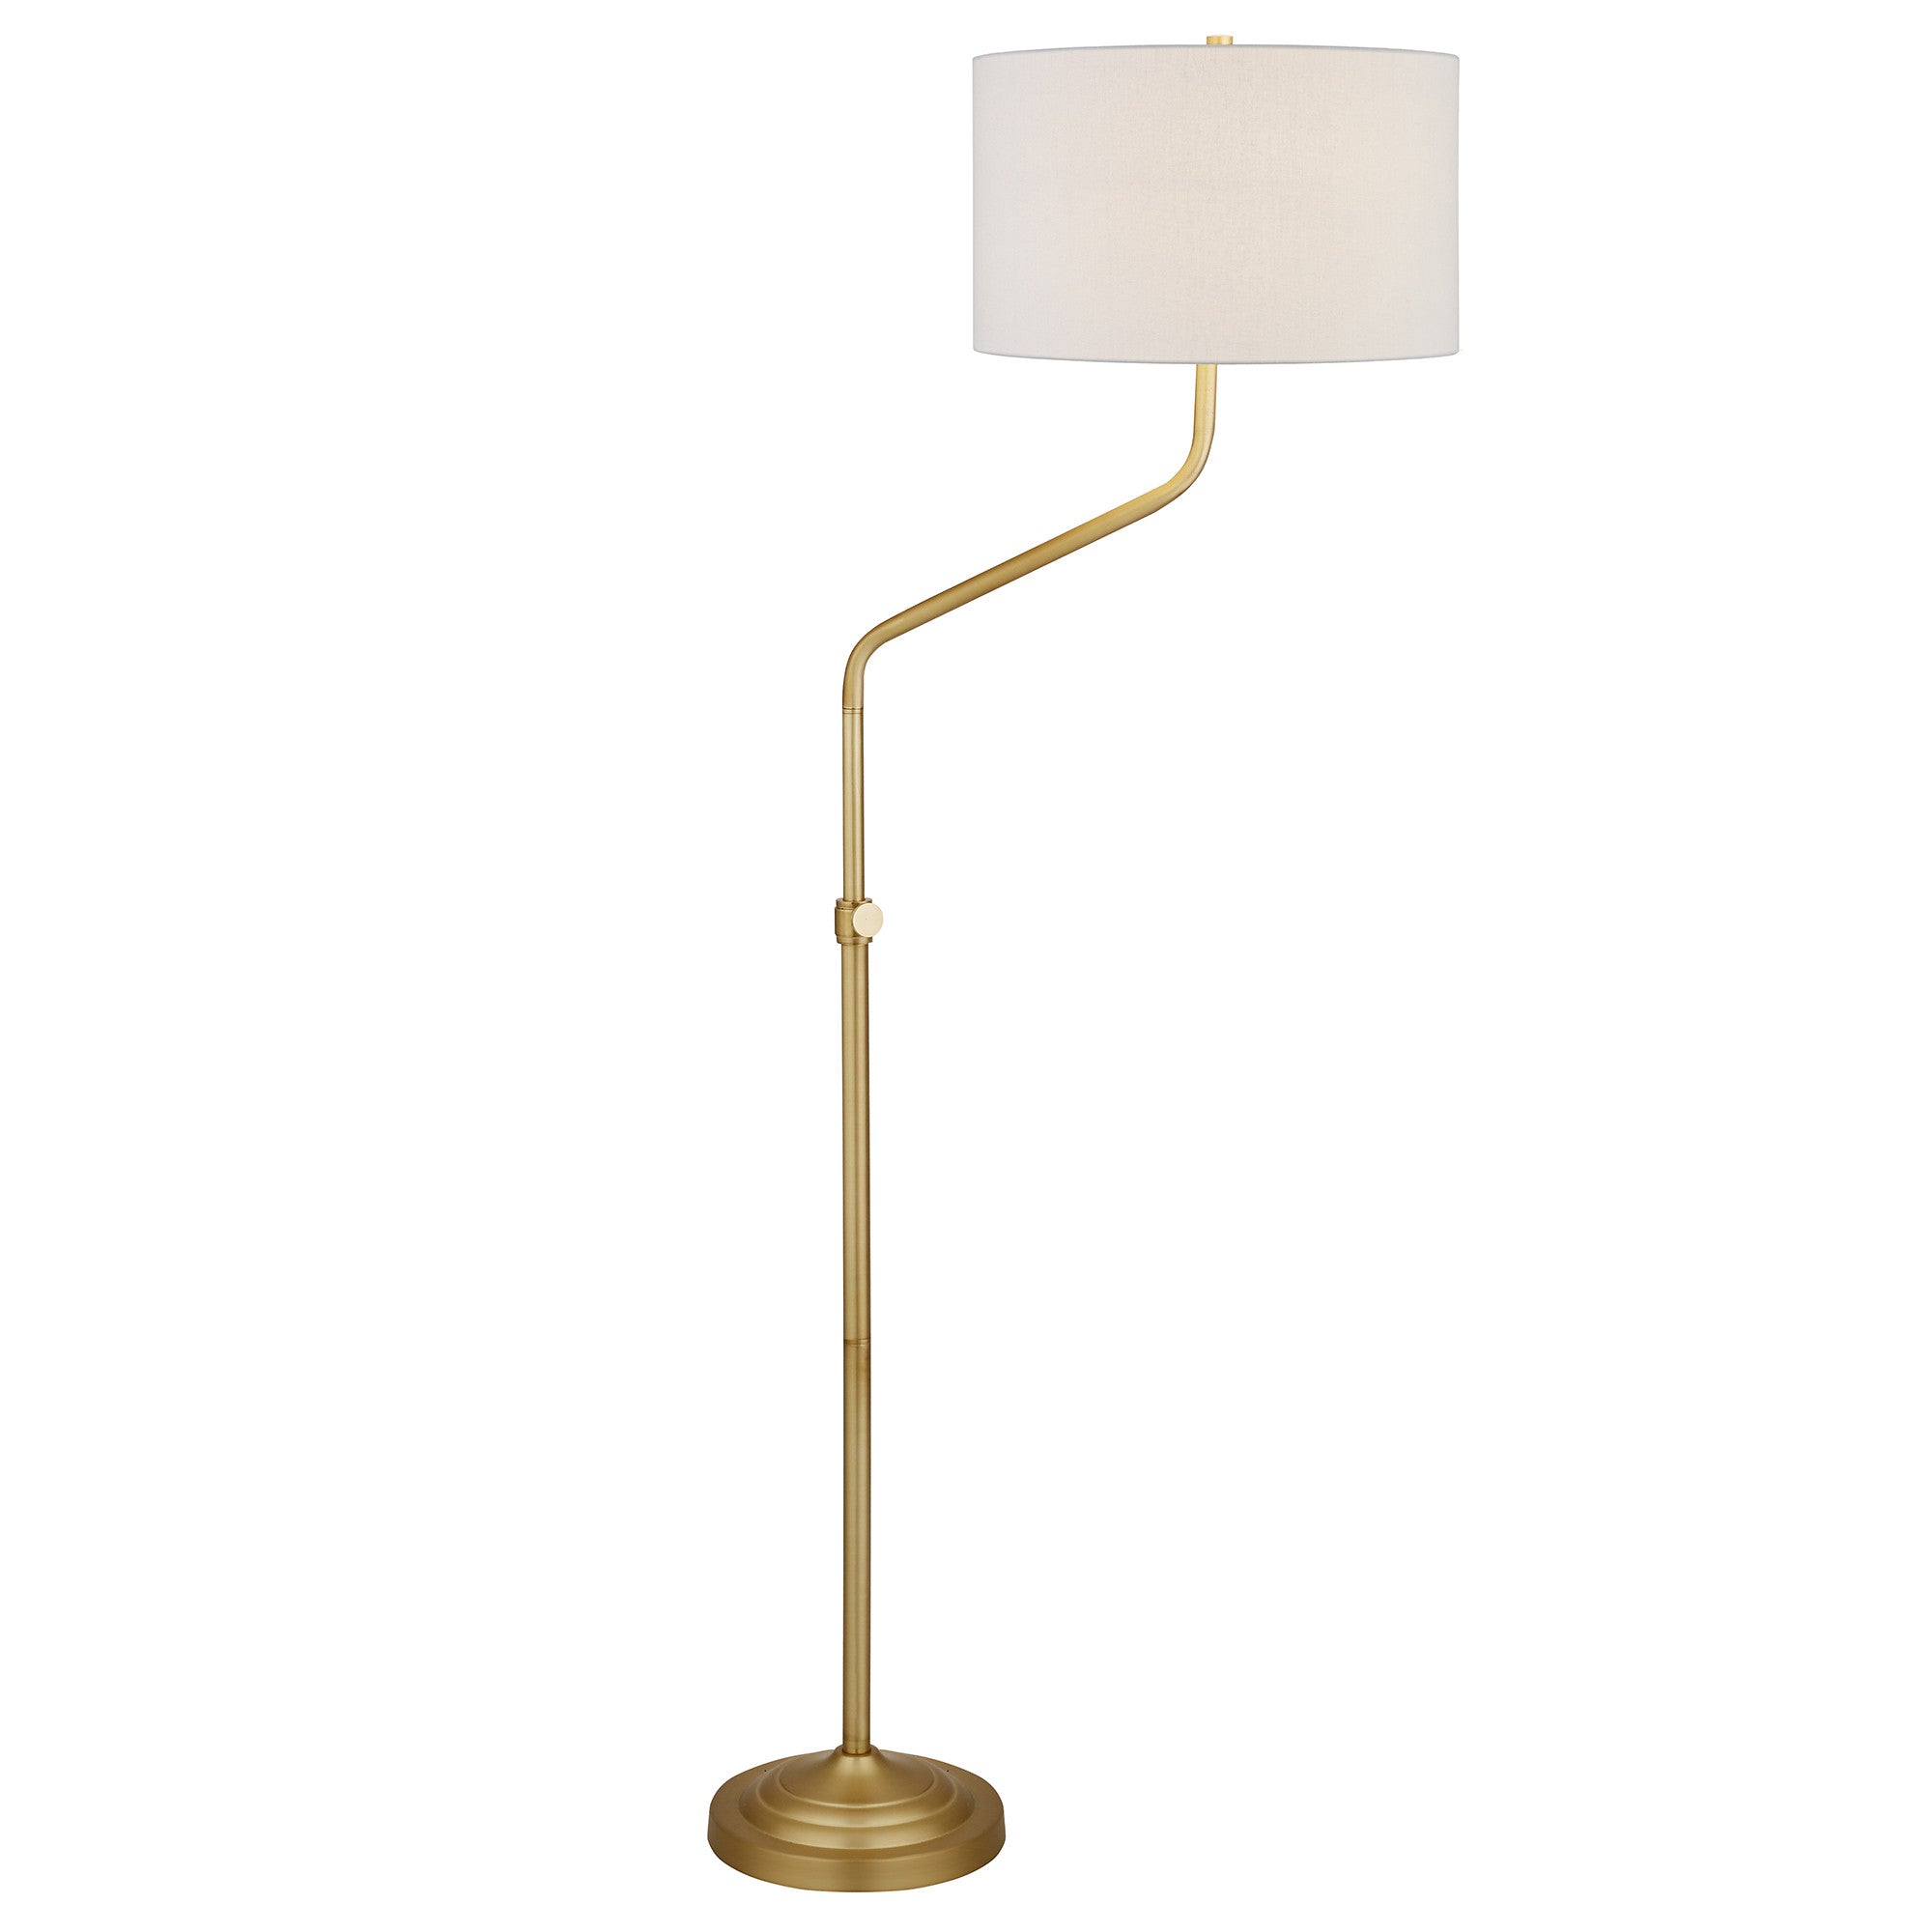 66" Brass Adjustable Traditional Shaped Floor Lamp With White Frosted Glass Drum Shade